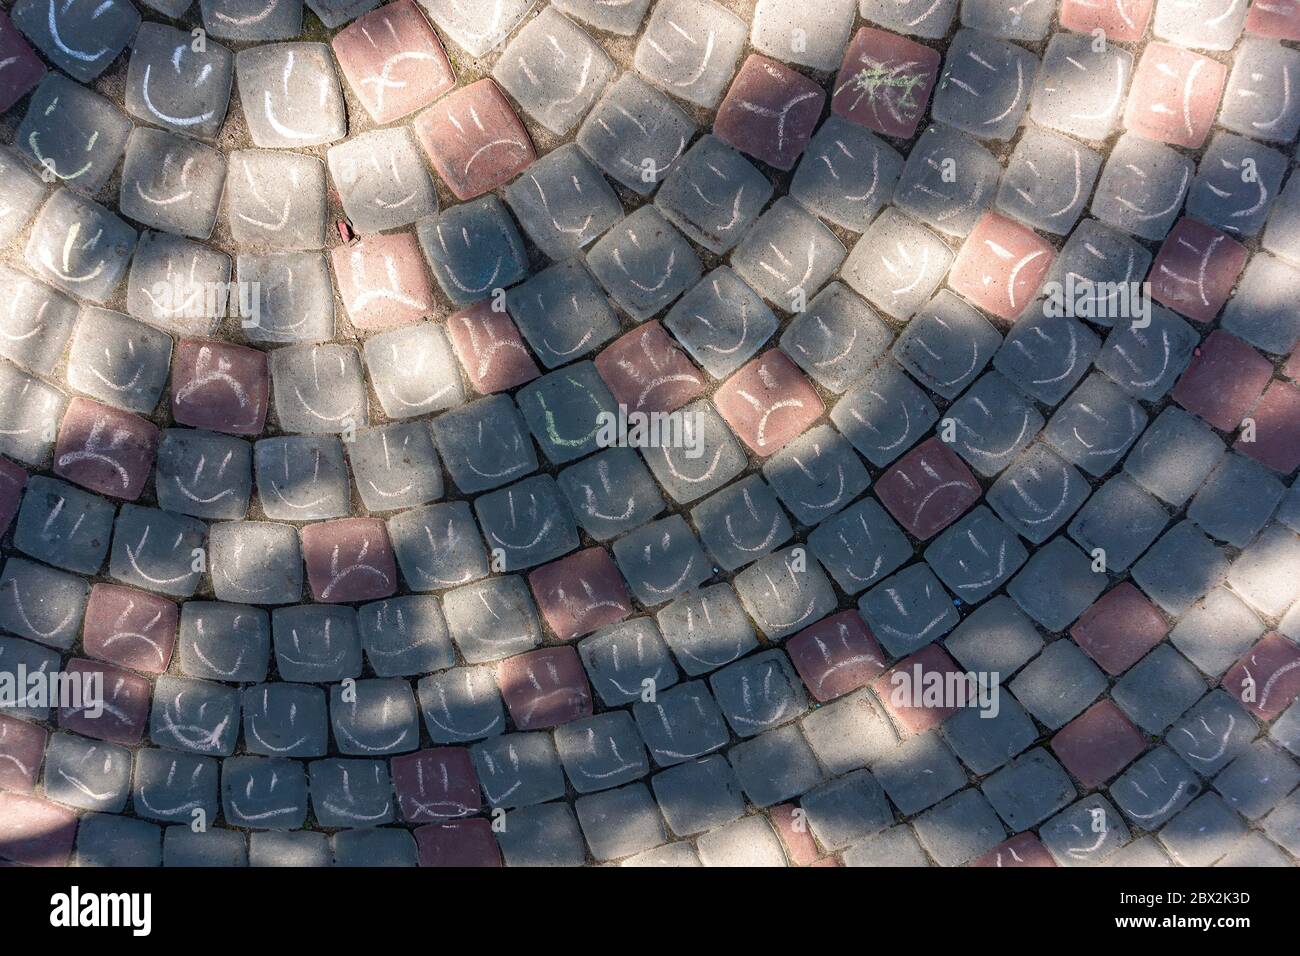 Сhalk drawing on asphalt. Face cartoon smiley and sad. Top view of paving stones with kids art. Stock Photo